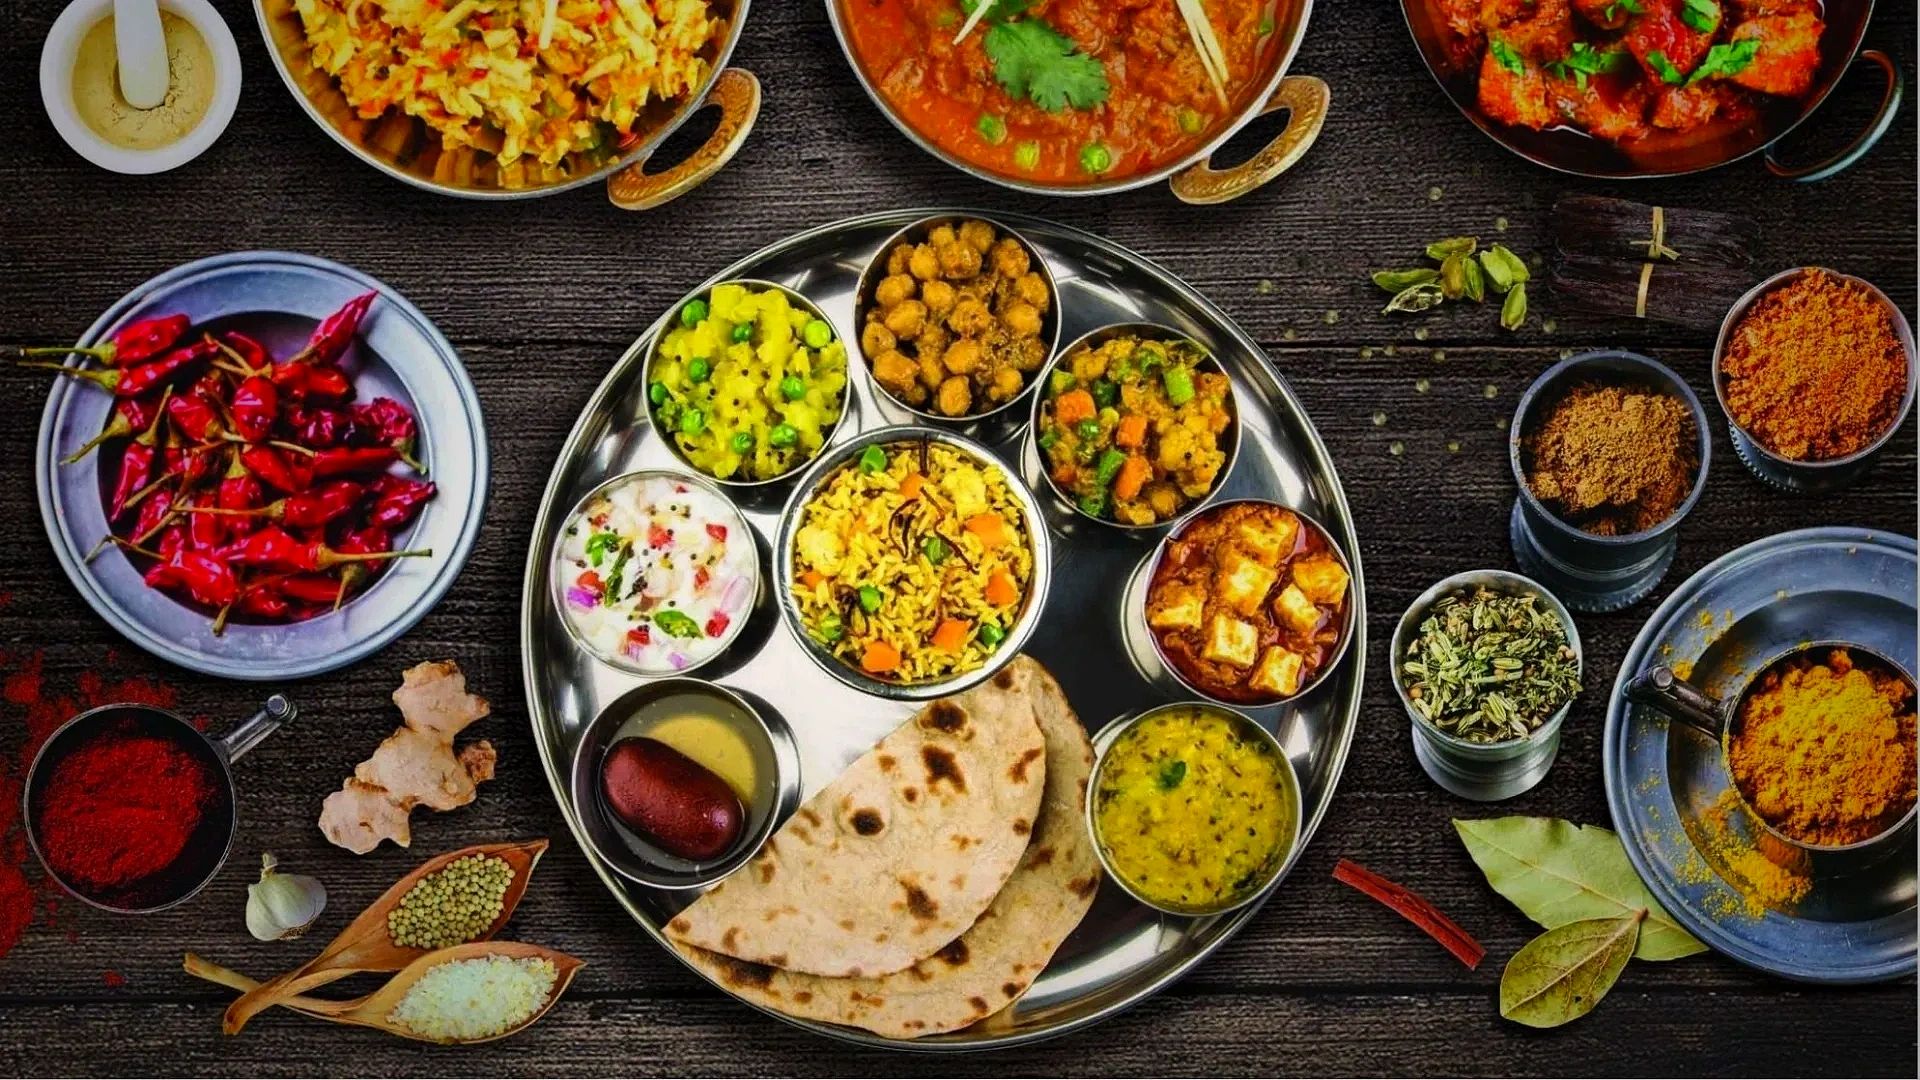 Authentic Indian Food at it's best in traditional thali.